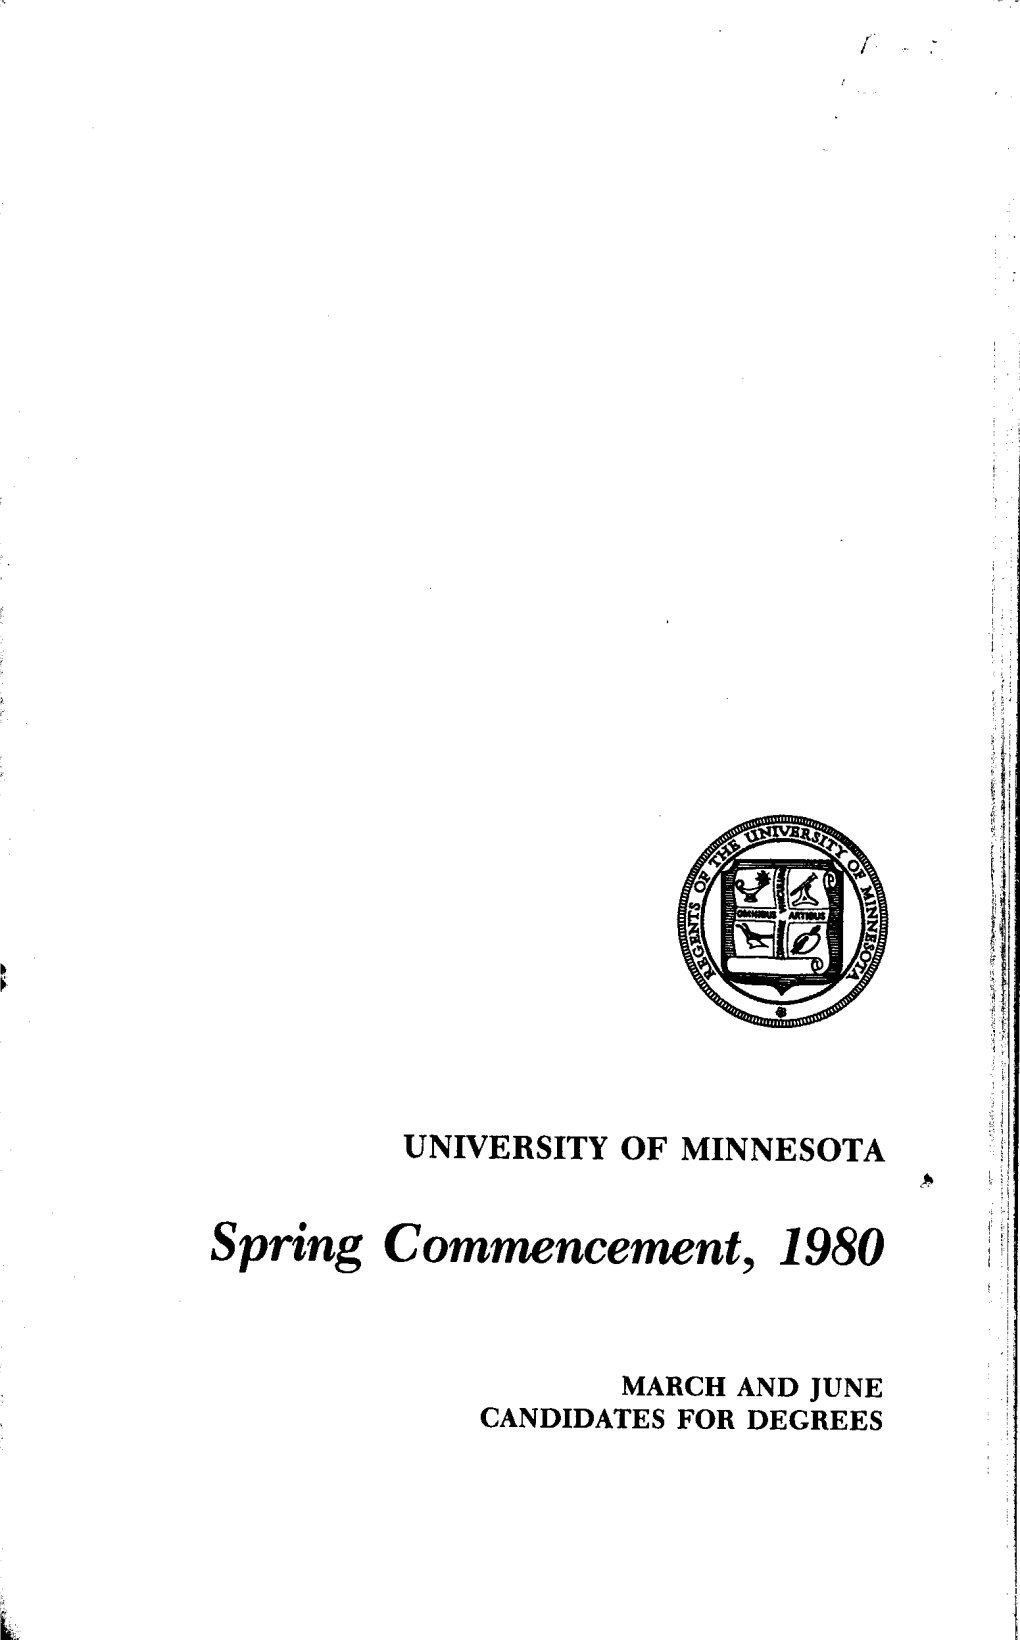 Spring Commencement, 1980